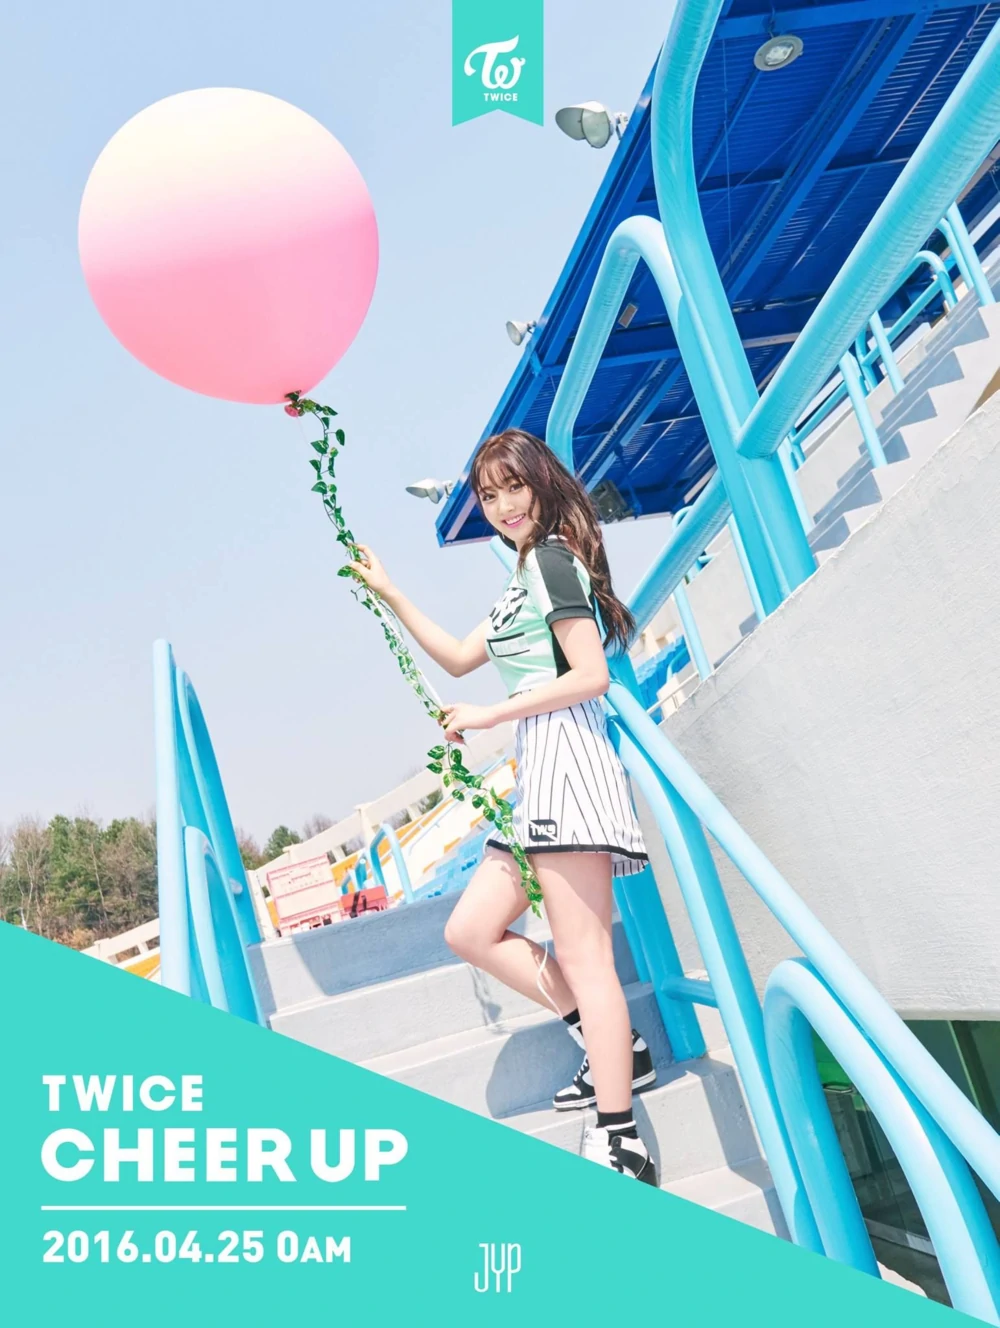 Twice Page 2 Jihyo Concept Teaser Picture Image Photo Kpop K-Concept 1